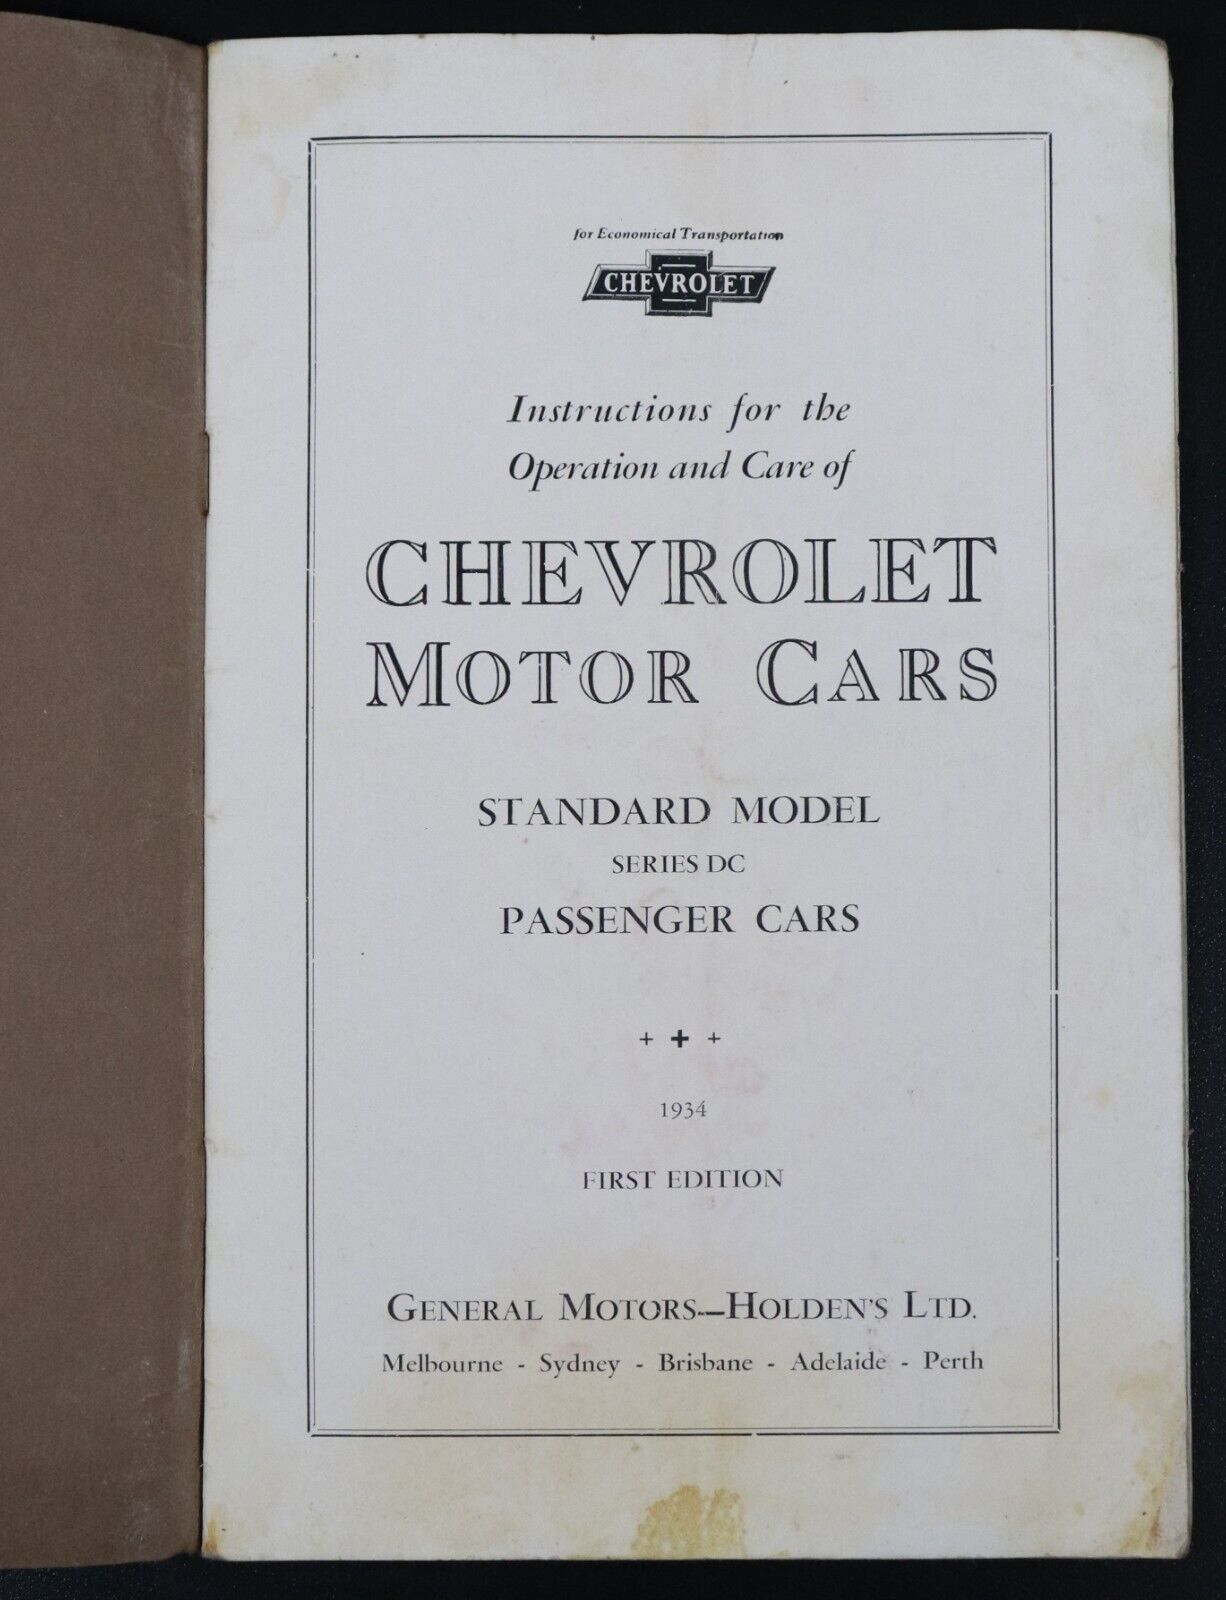 1934 Chevrolet Motor Cars Owners Manual Automotive Book G.M. Holden's Australia - 0